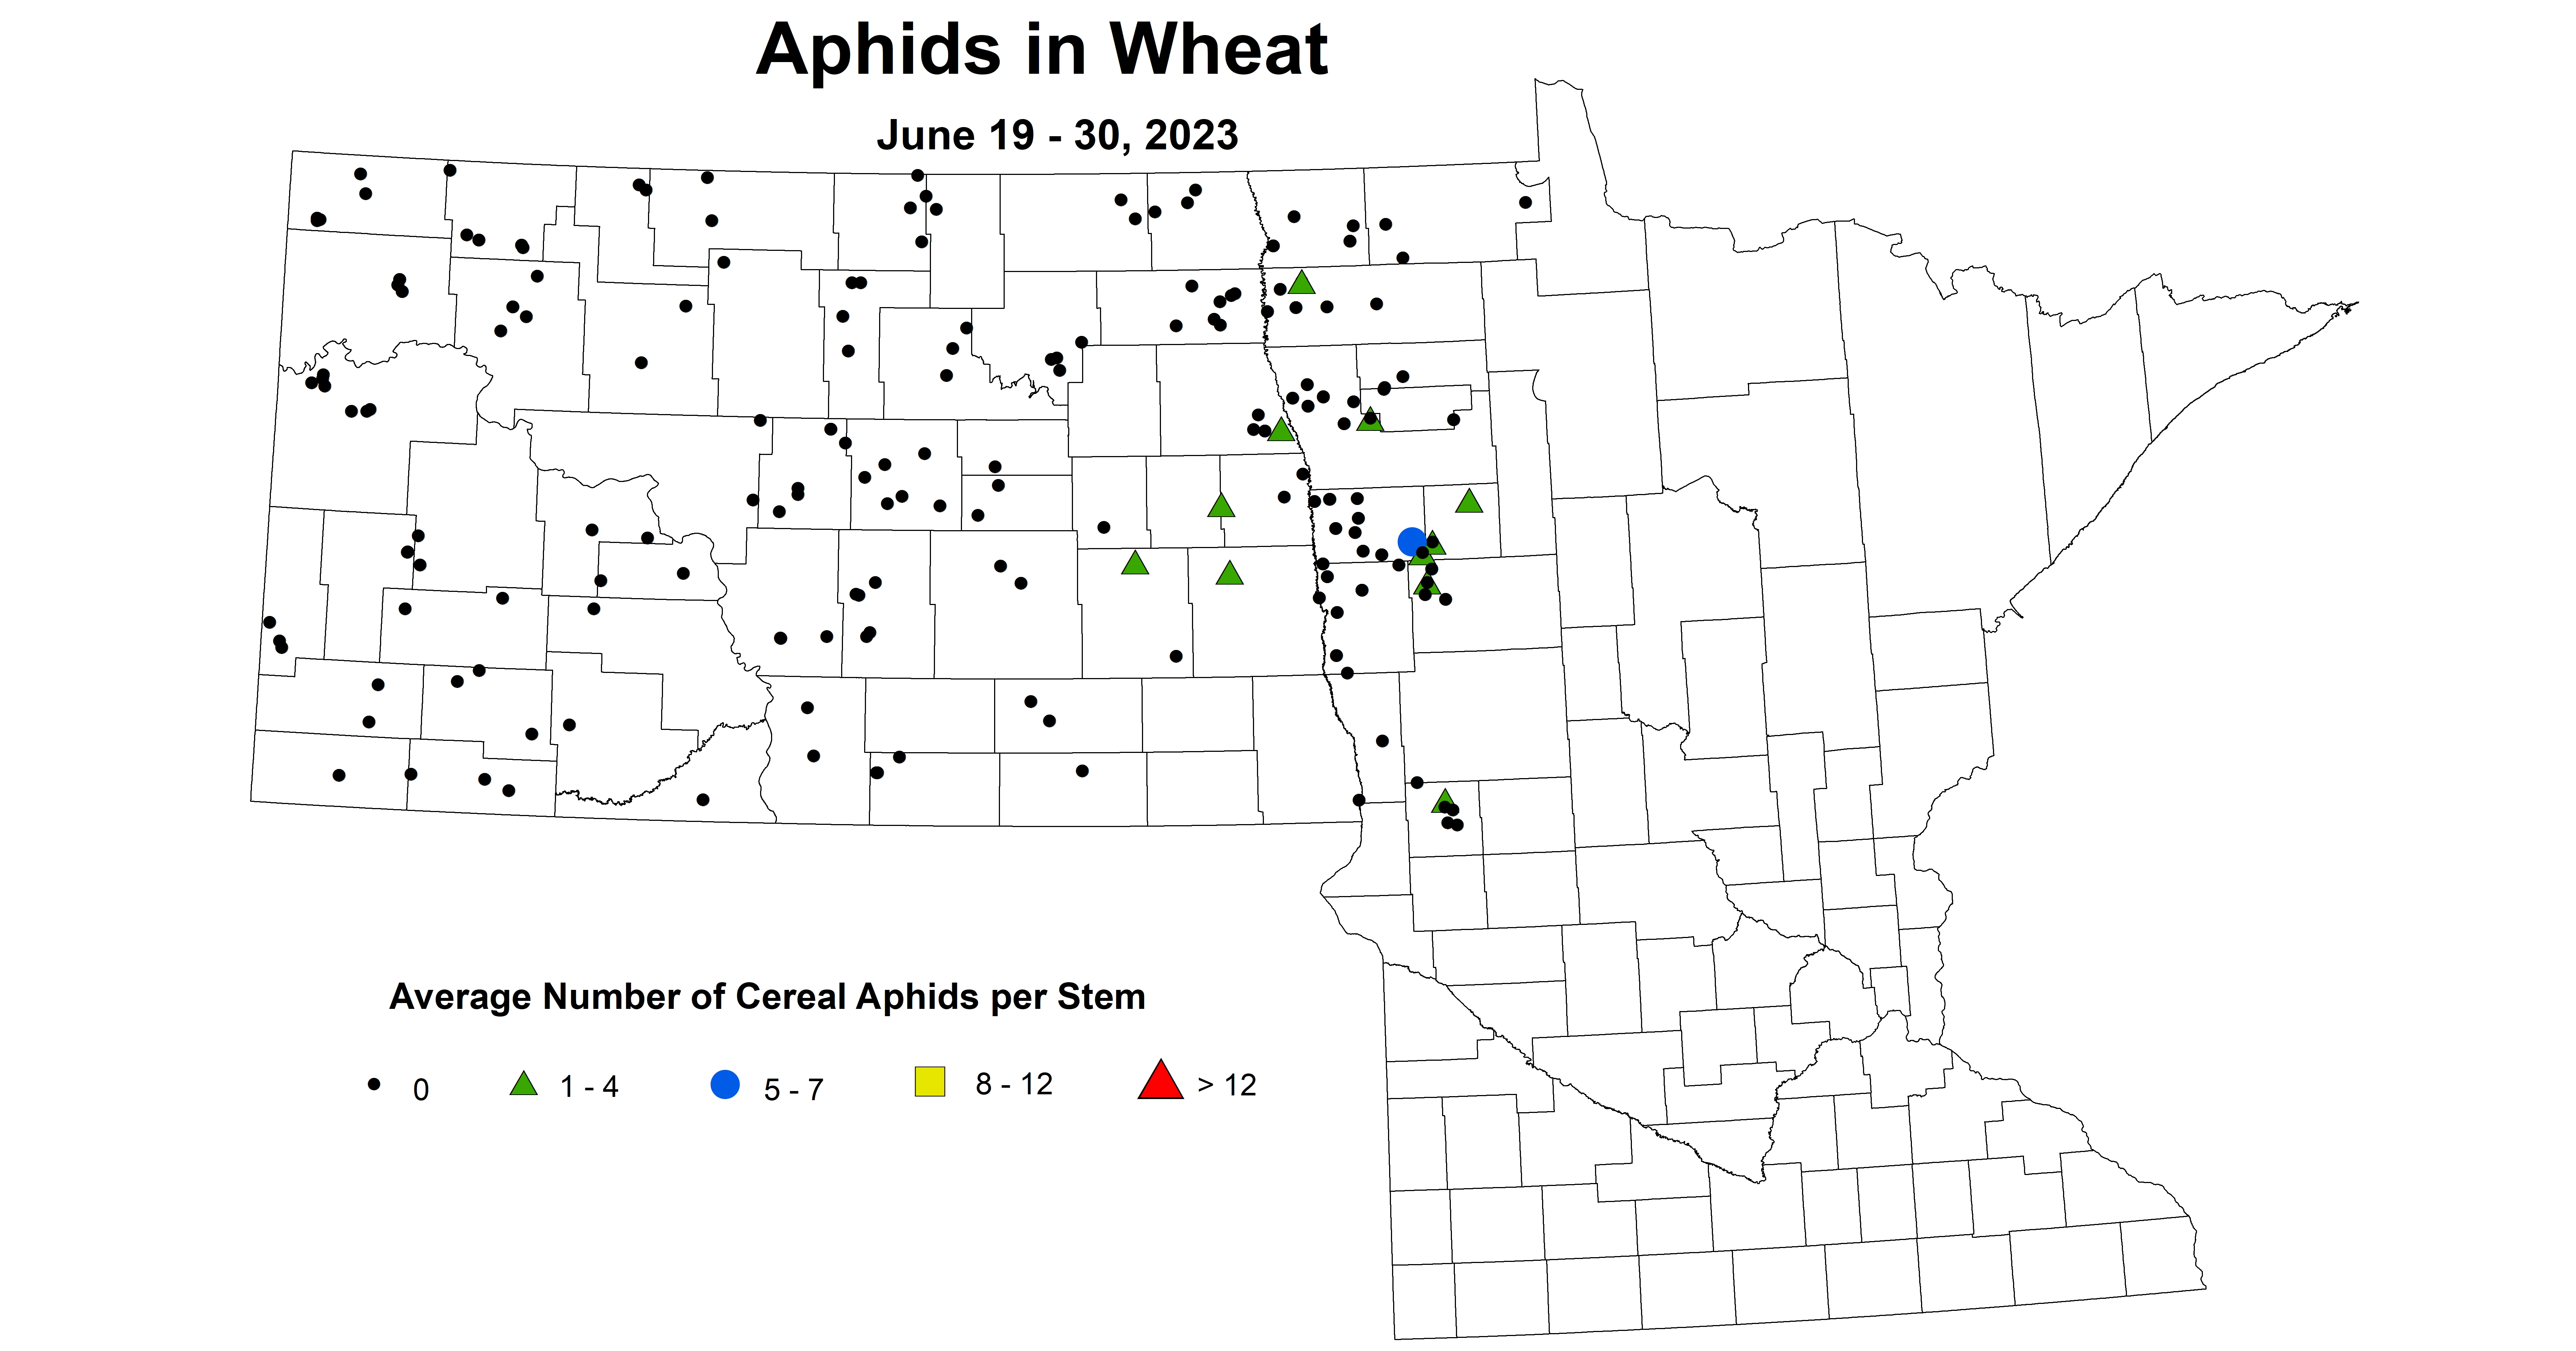 wheat aphids June 19-30 2023